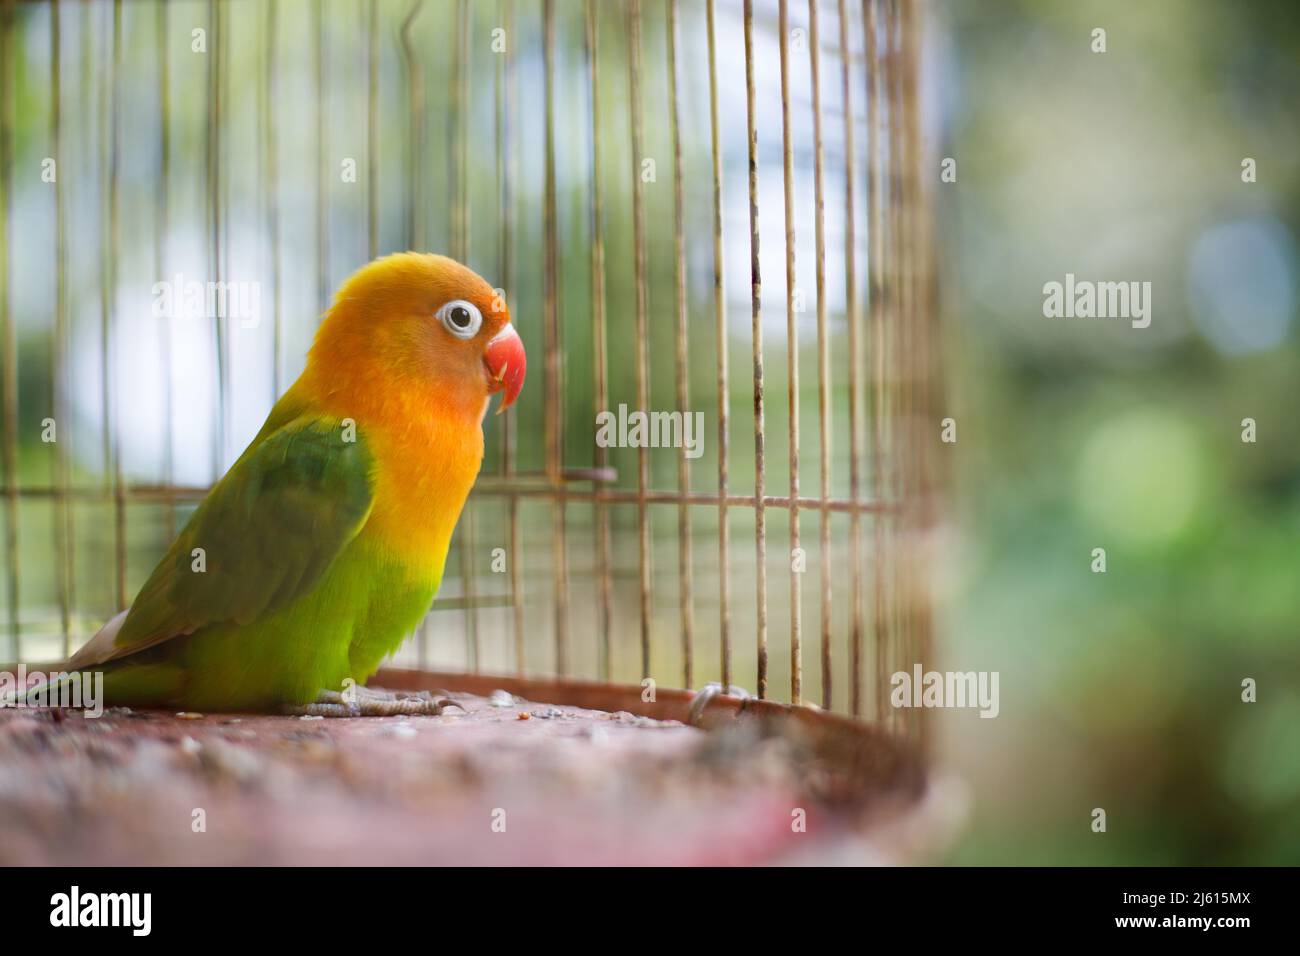 Red, yellow and green parrot in a cage Stock Photo